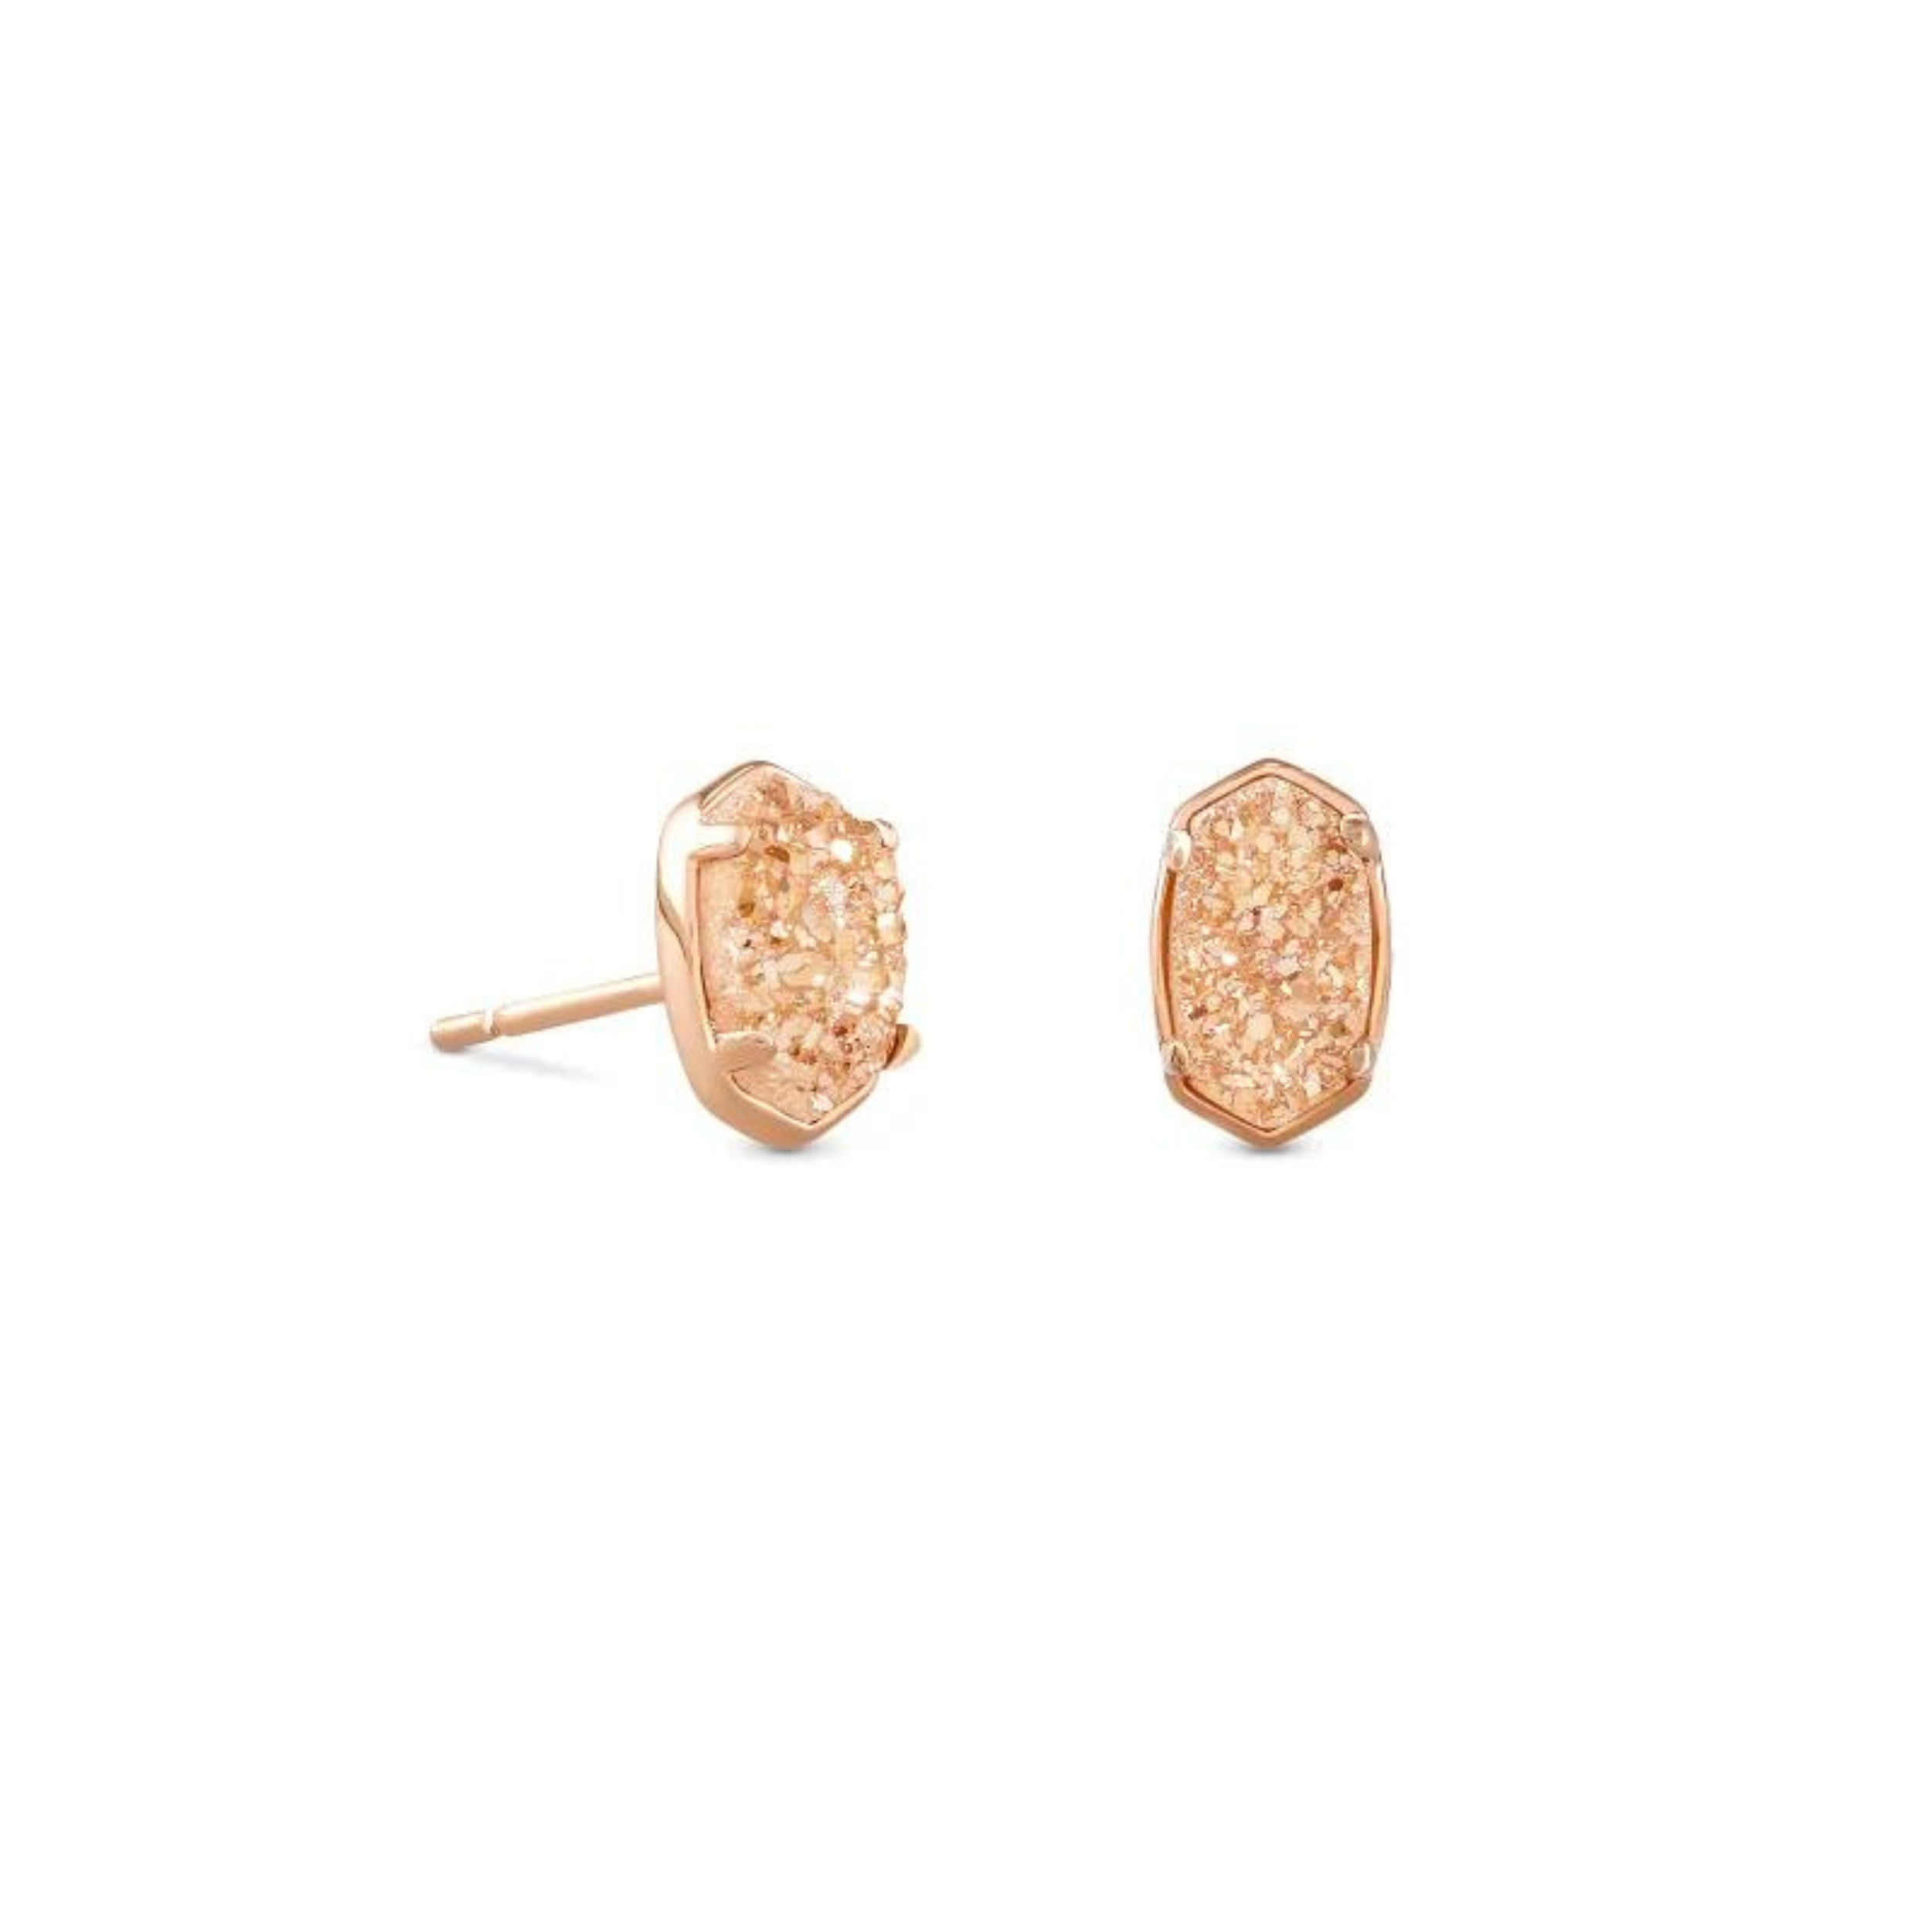 Rose gold earring with sand drusy stone, pictured on a white background.